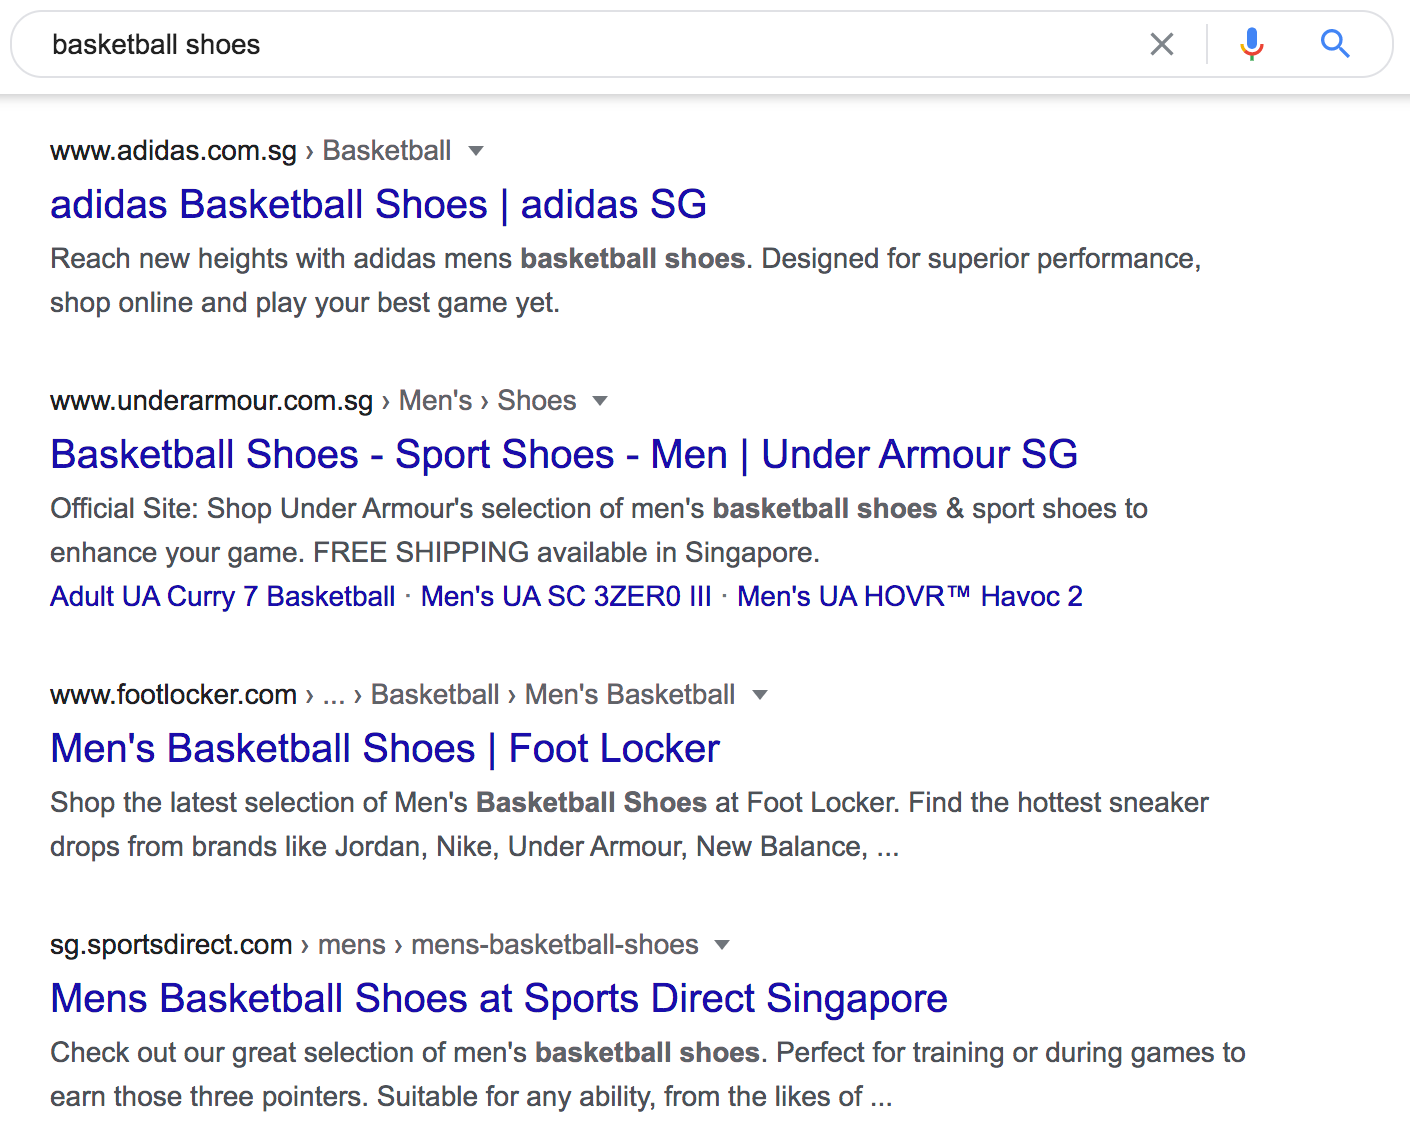 "basketball shoes" top-ranking pages